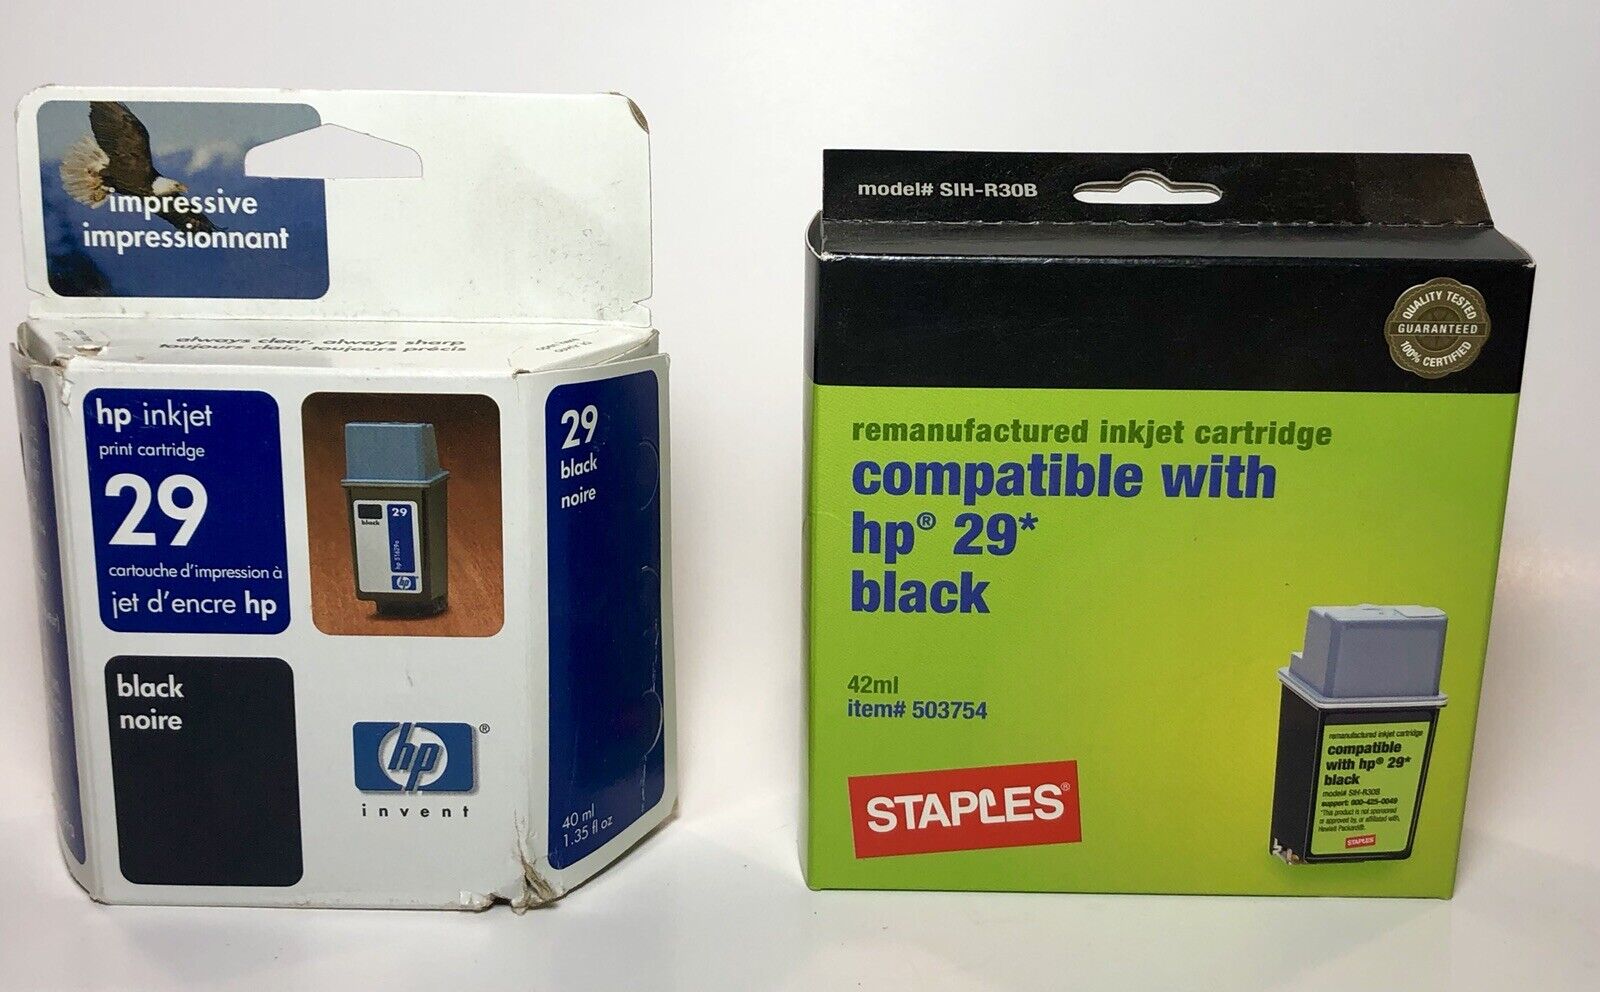 New Sealed HP Inkjet Print Cartridge 29 Black 51629a + Staples HP 29 Compatible